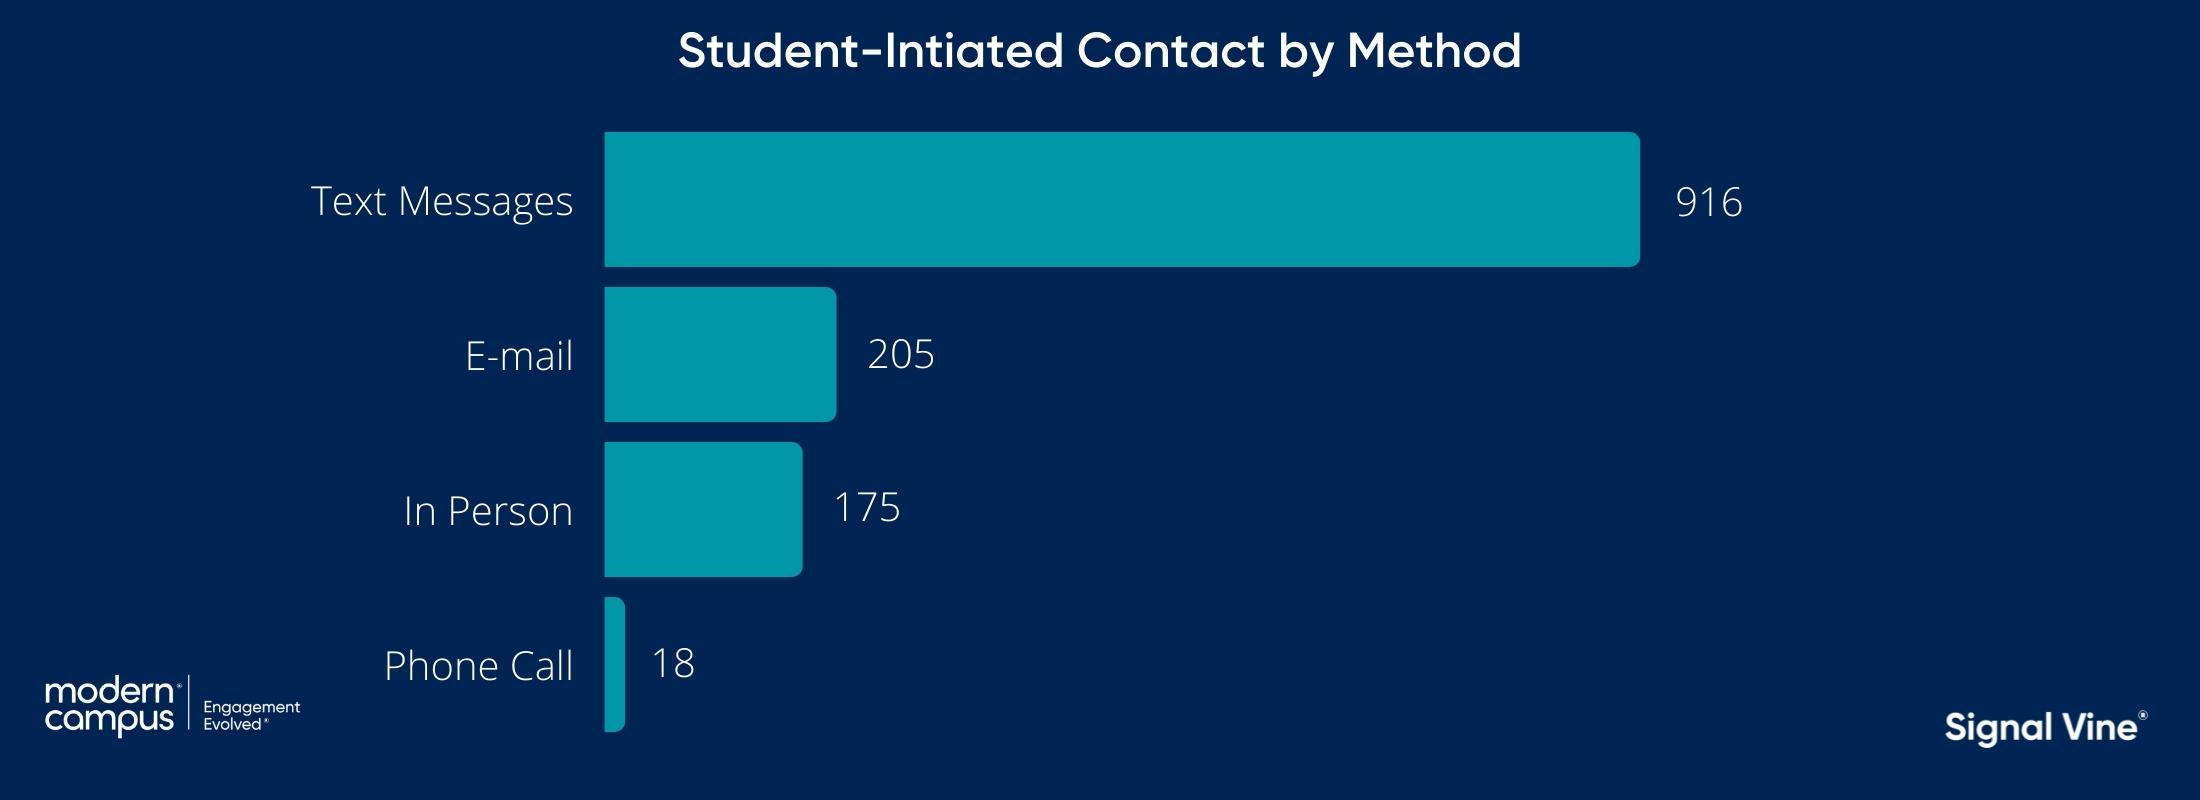 bar graph showing that 916 contacts initiated by students were through text messages, 205 were through e-mail, 175 in person, and 18 via phone call